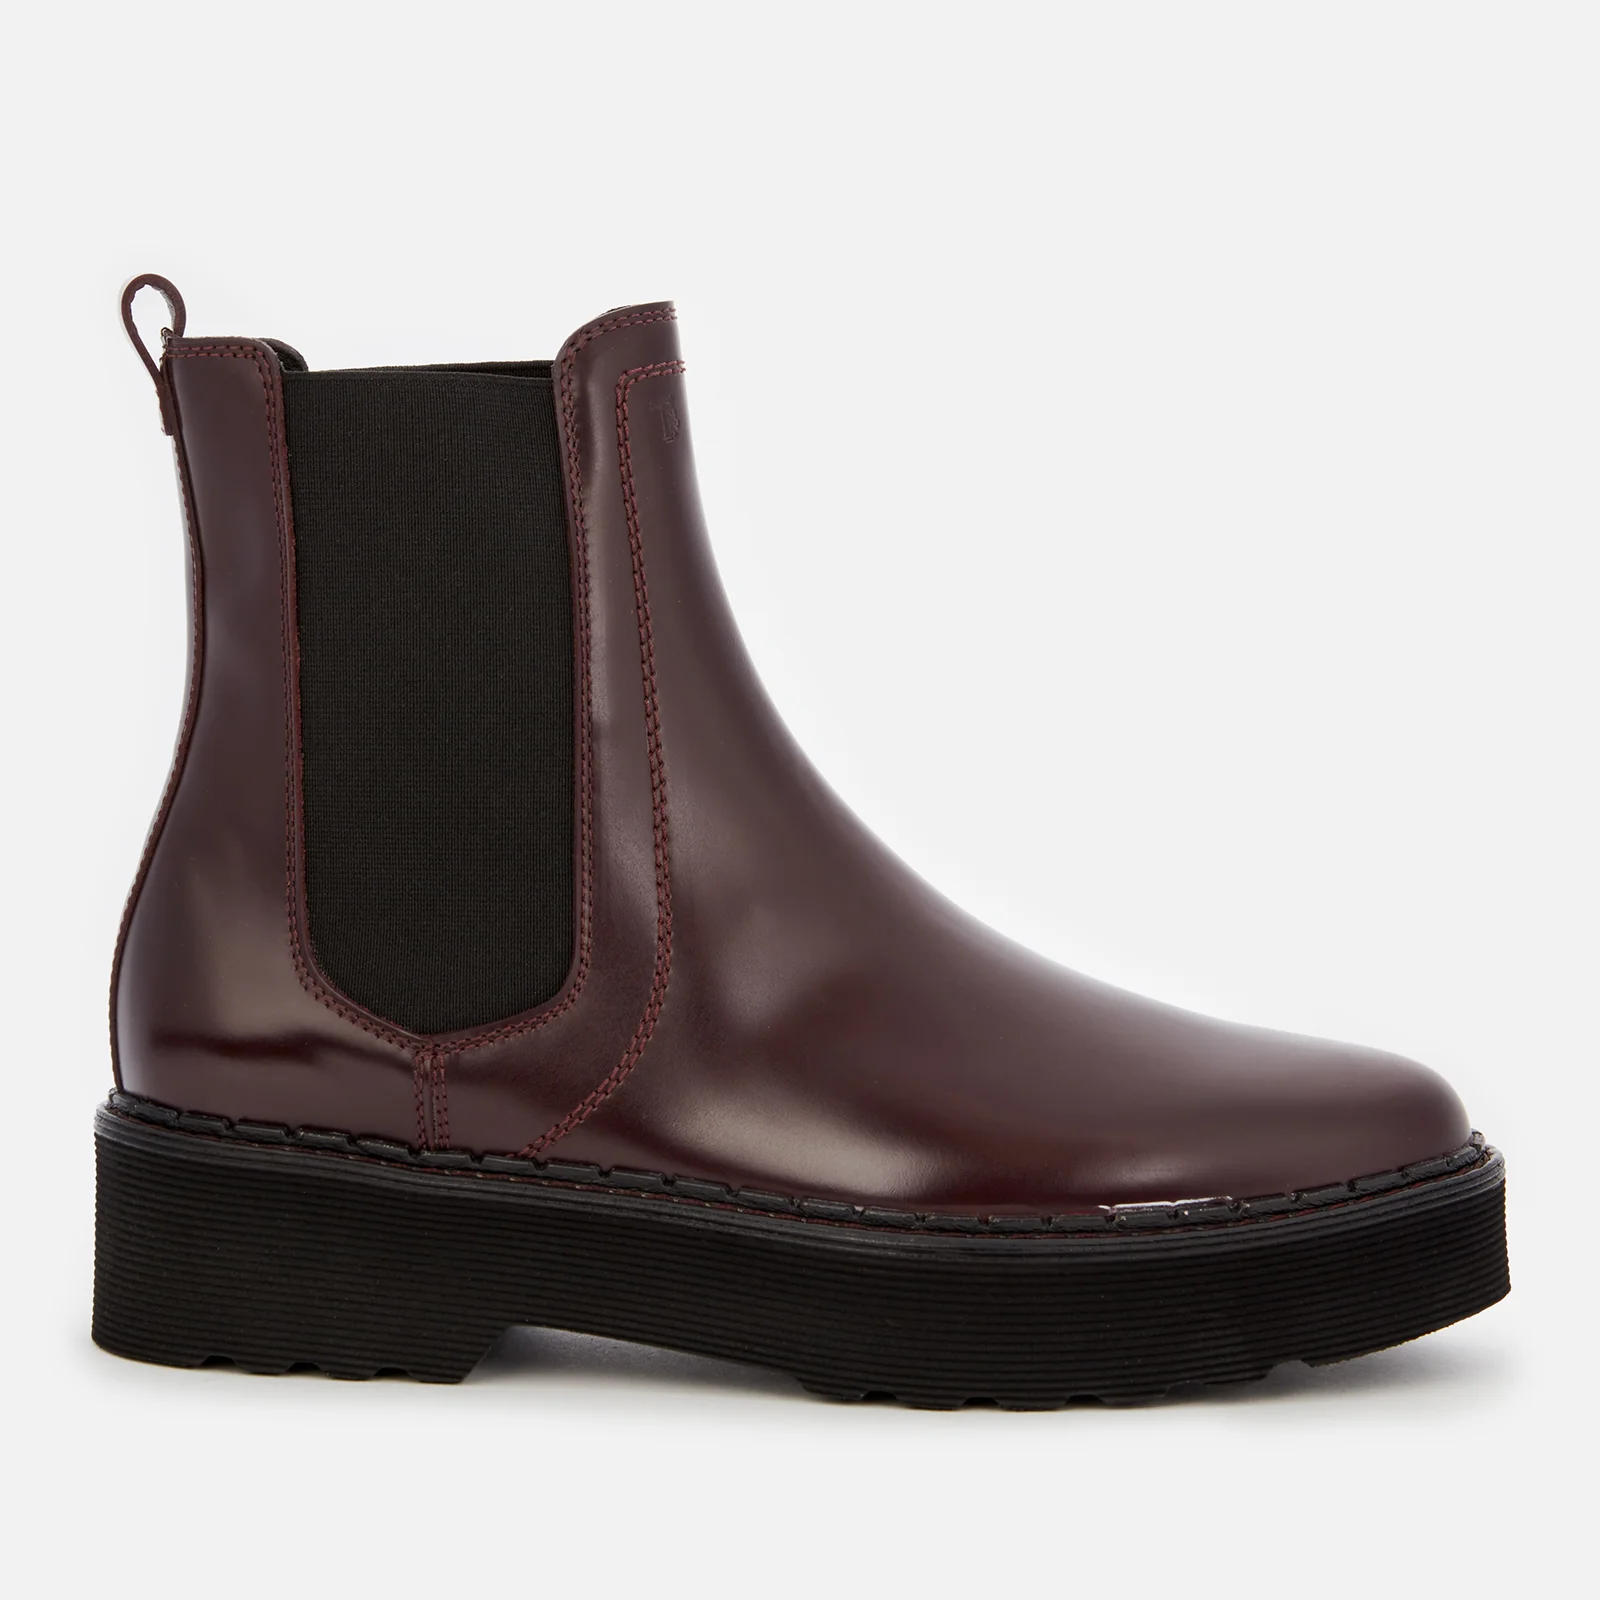 Tod's Women's Leather Chelsea Boots - Burgundy Image 1